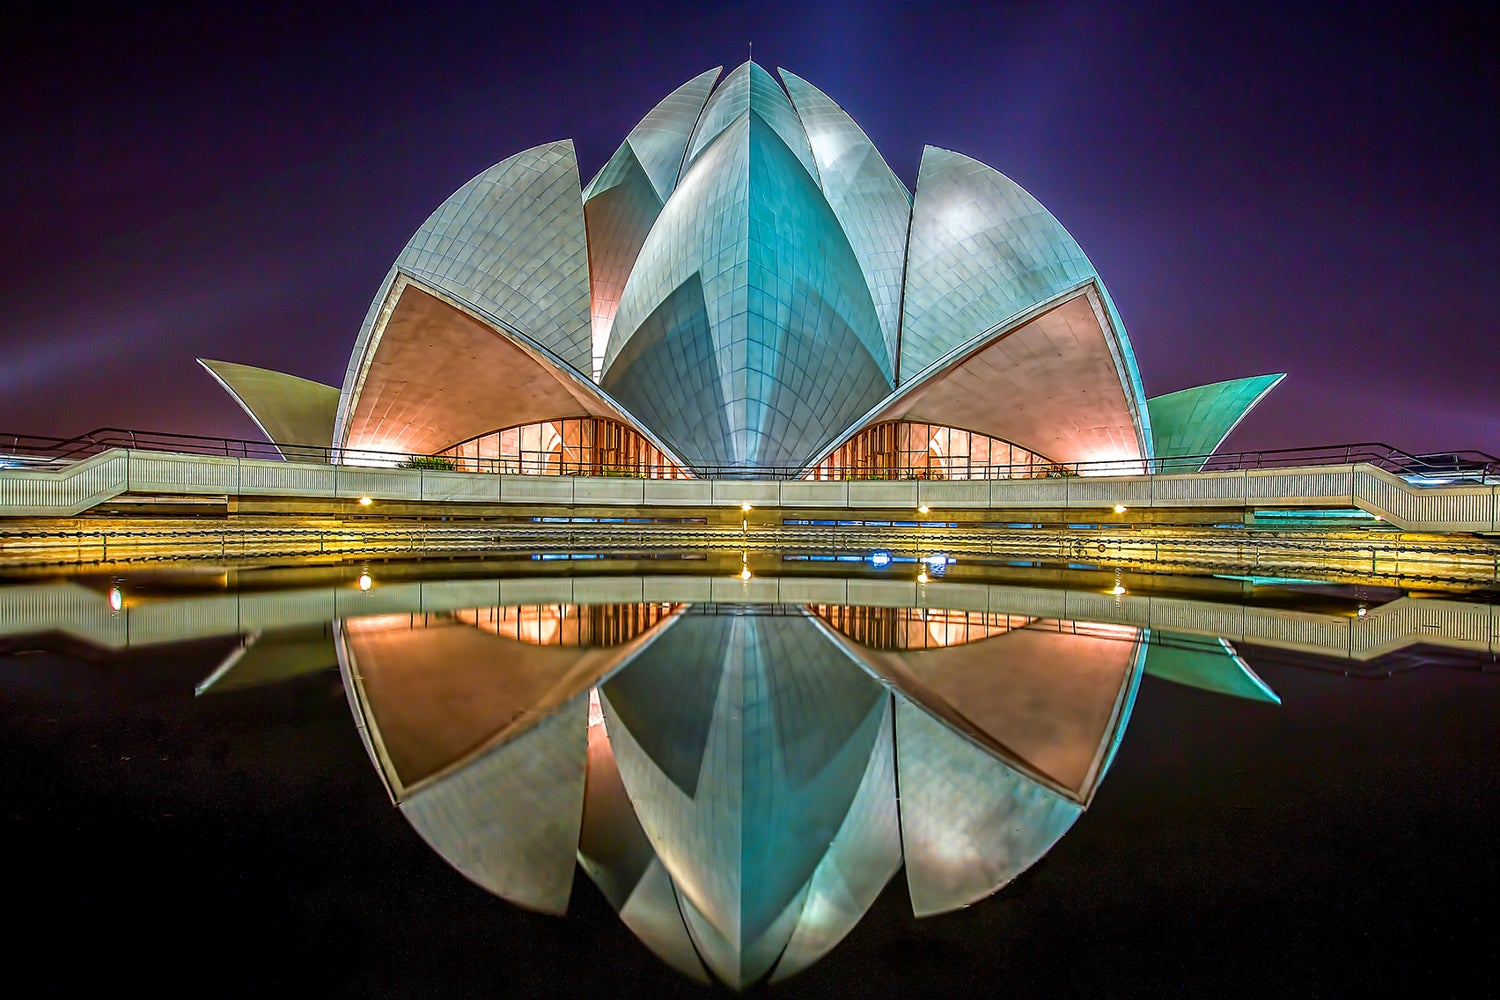 Wall Mural Photo Wallpaper The Lotus Temple | Shop now!